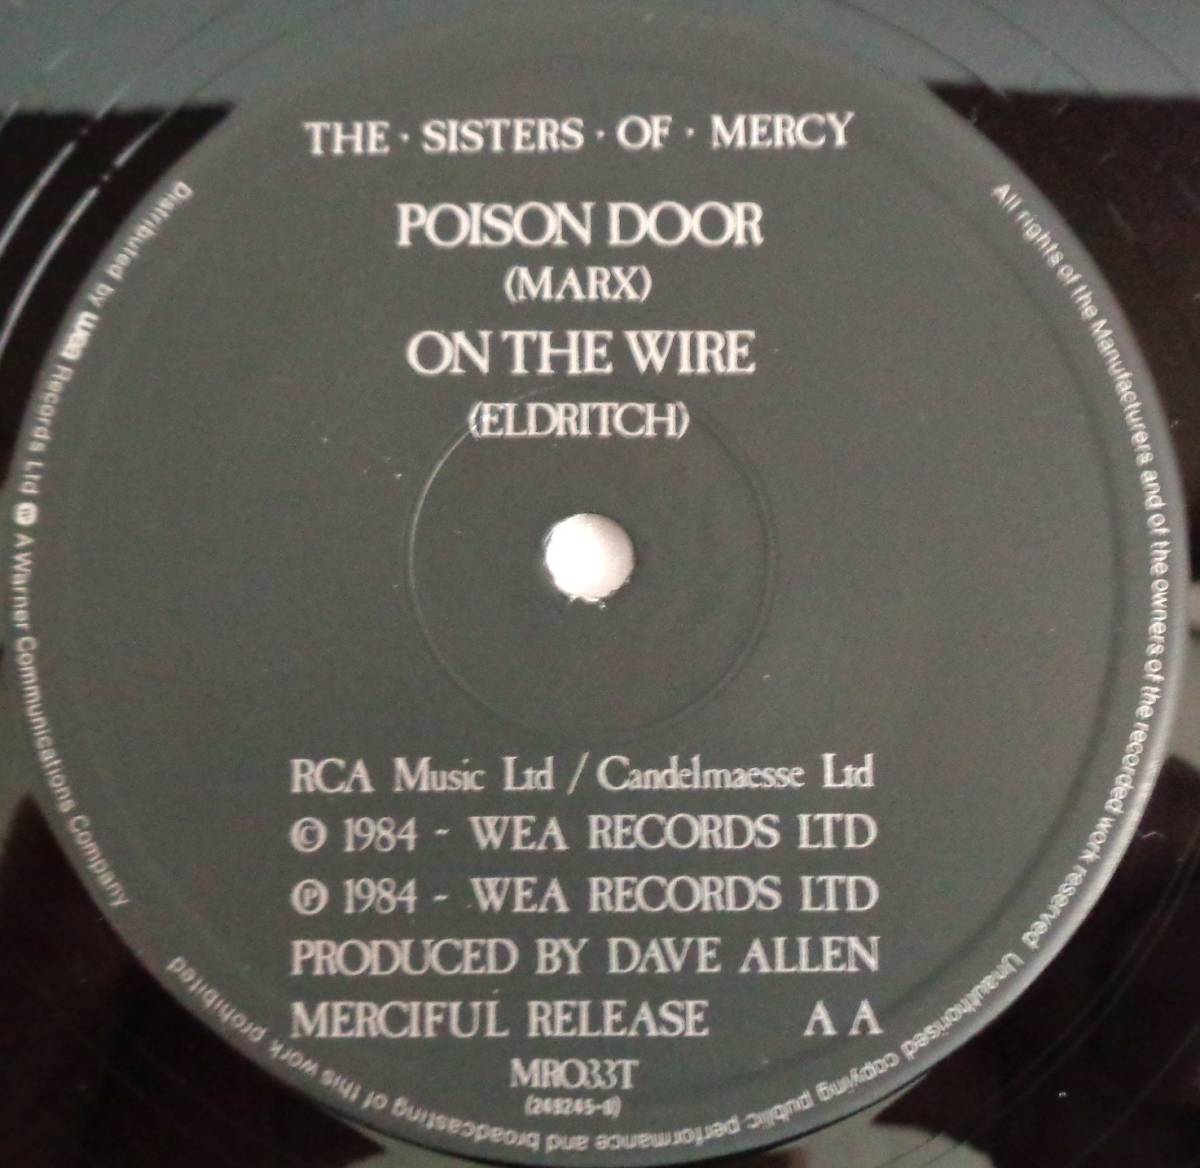 UK盤12inc Limited Edition　The Sisters Of Mercy　Walk Away　free 7inc flexi disc付　1984年　全4曲　goth　ゴシック・ロック　_画像4